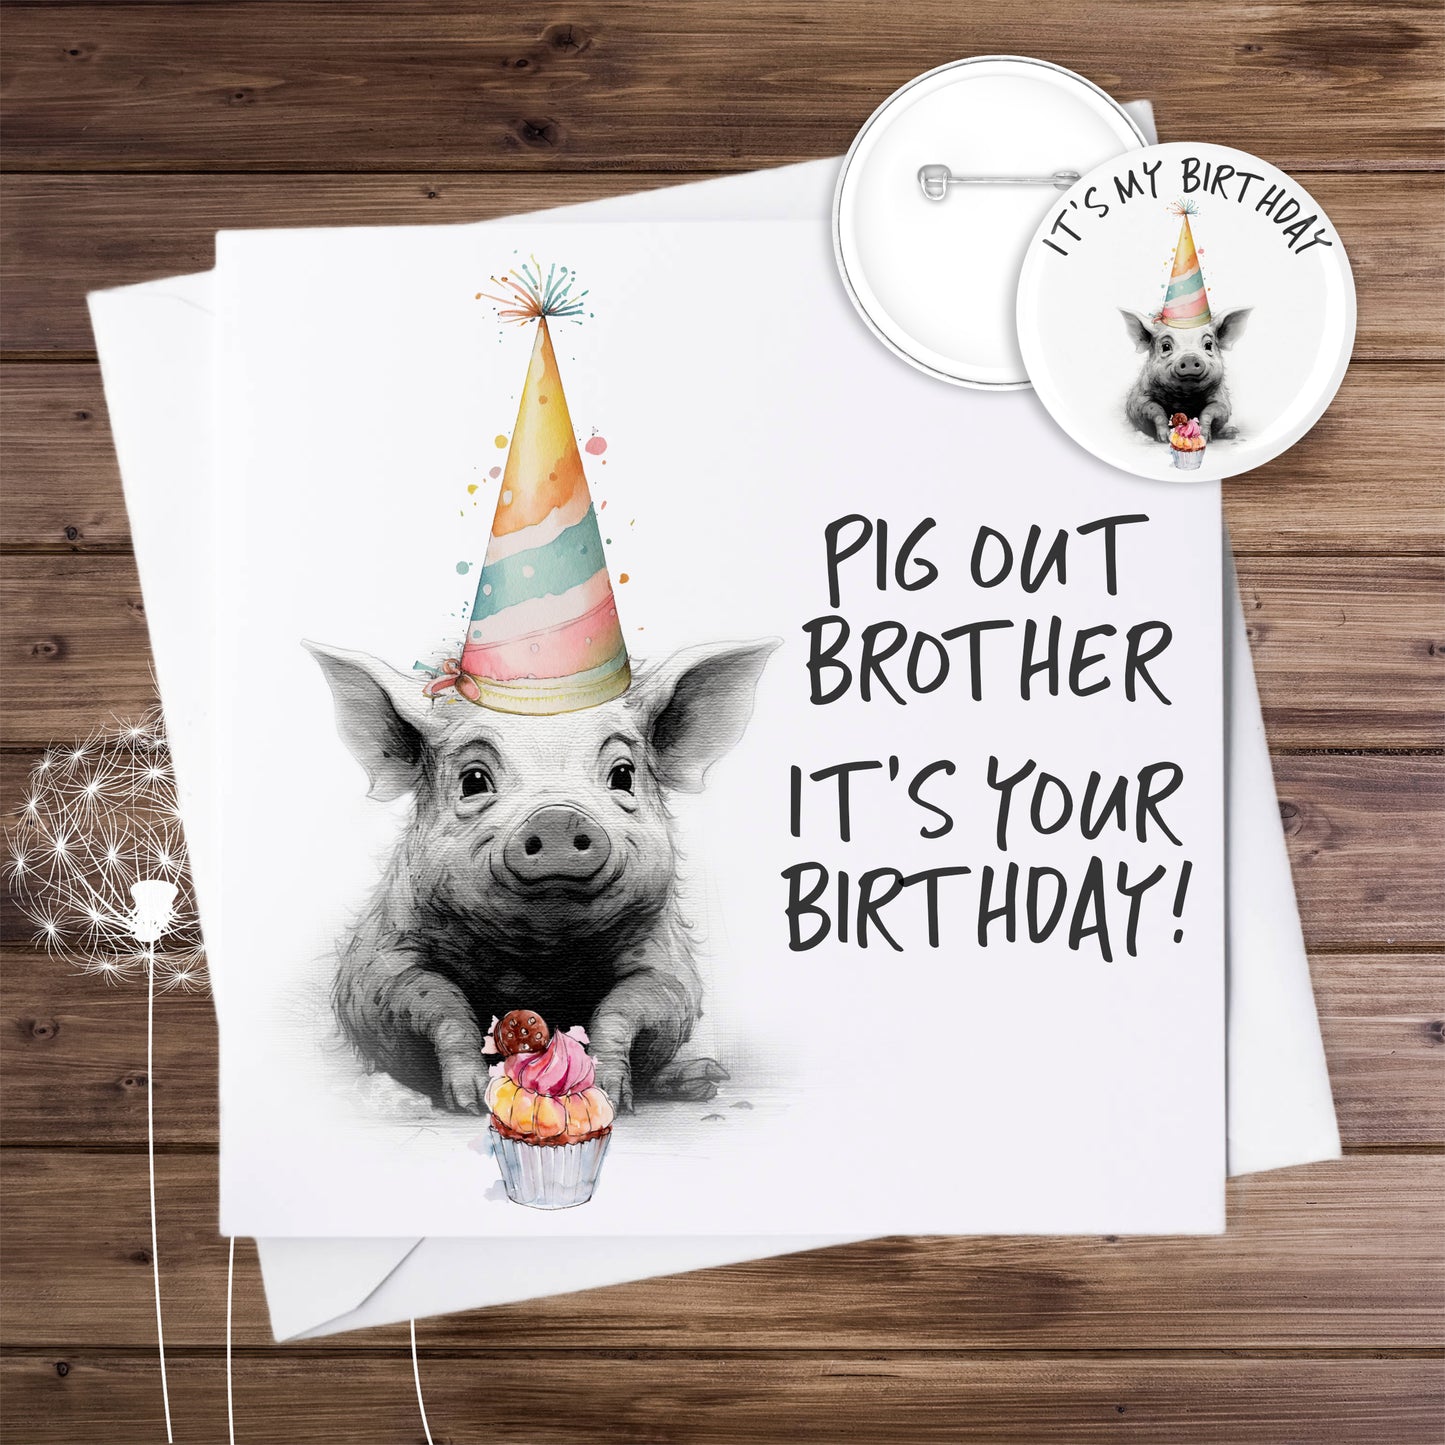 Personalised Birthday Piglet Card | Pig in Party Hat | Matching Badge Available.